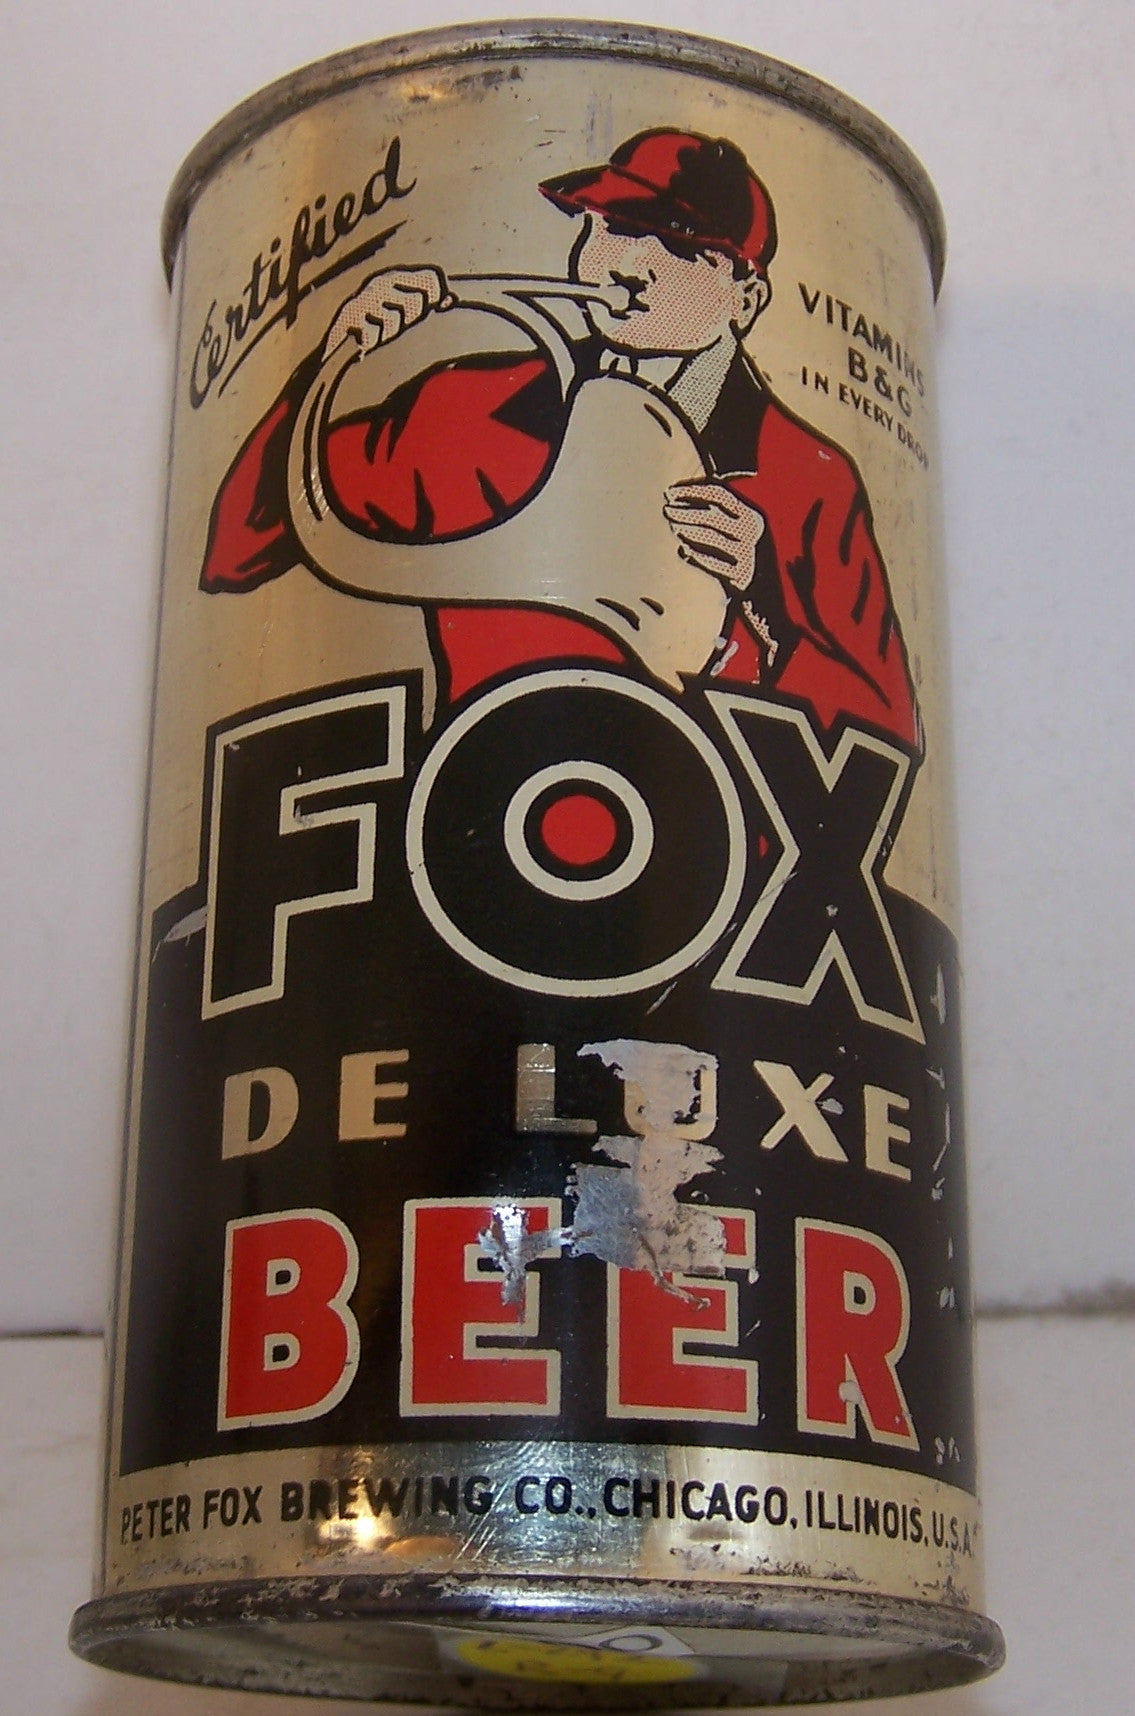 Fox DeLuxe Beer, Lilek page # 292, Grade 1- Sold on 2/11/15